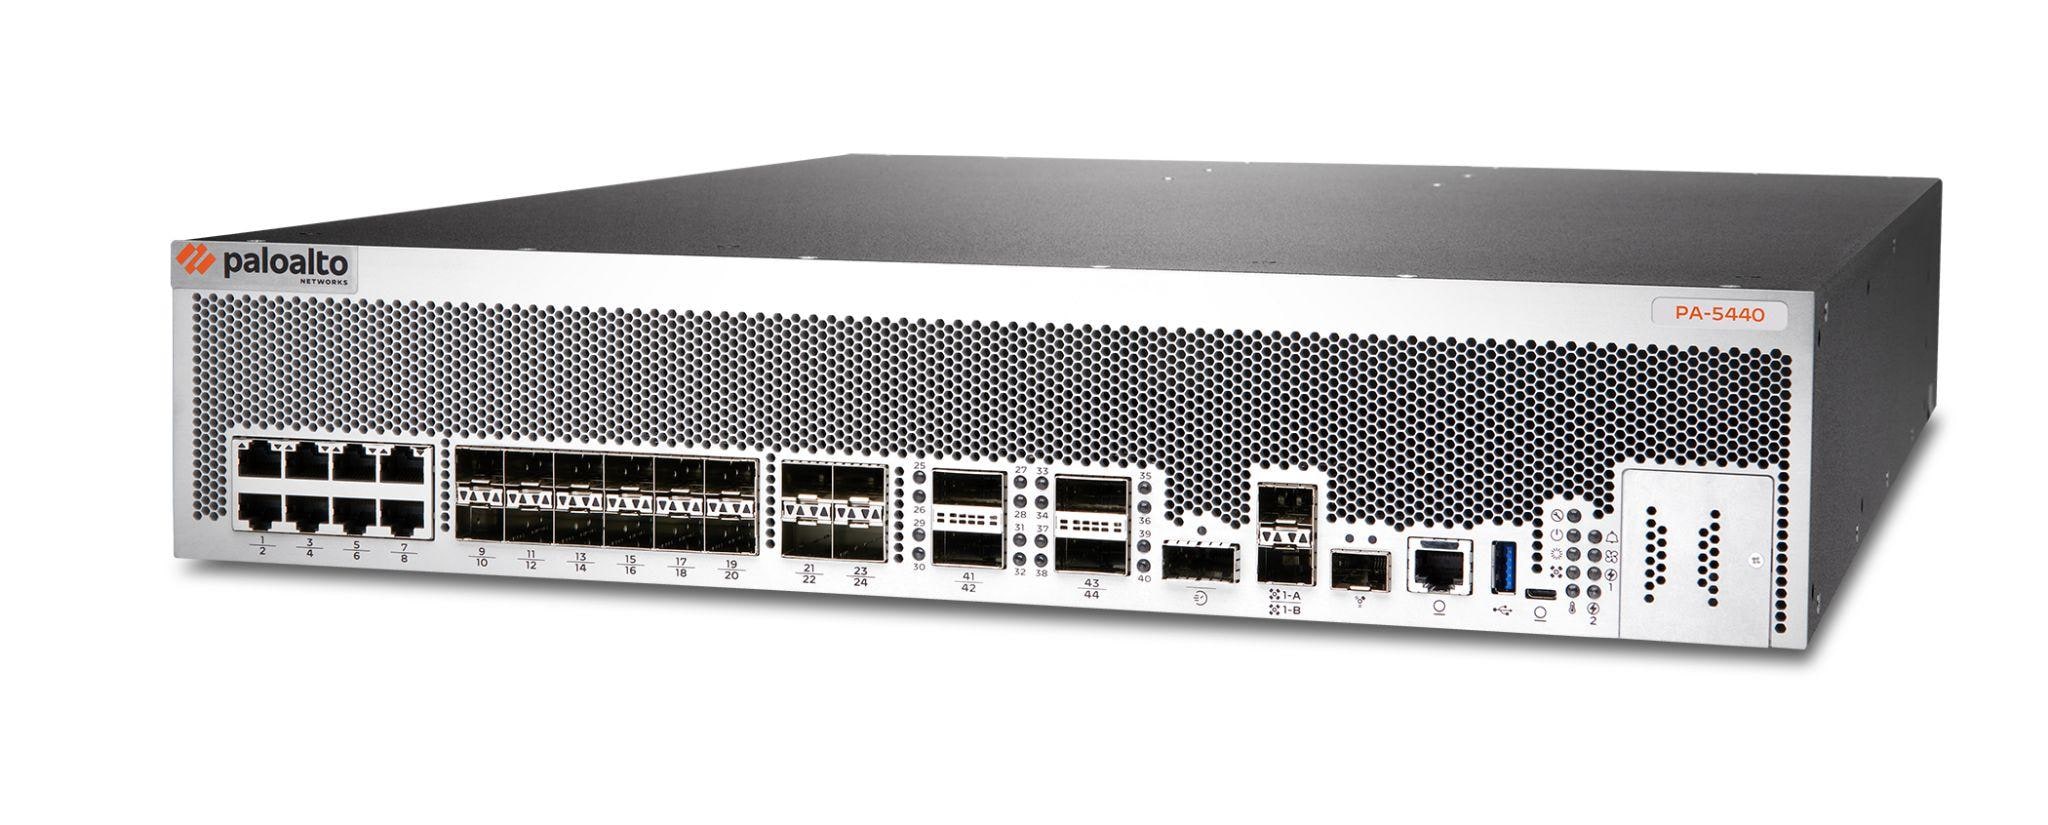 Image of Palo Alto Networks PA-5440 ML-Powered NGFW hardware.